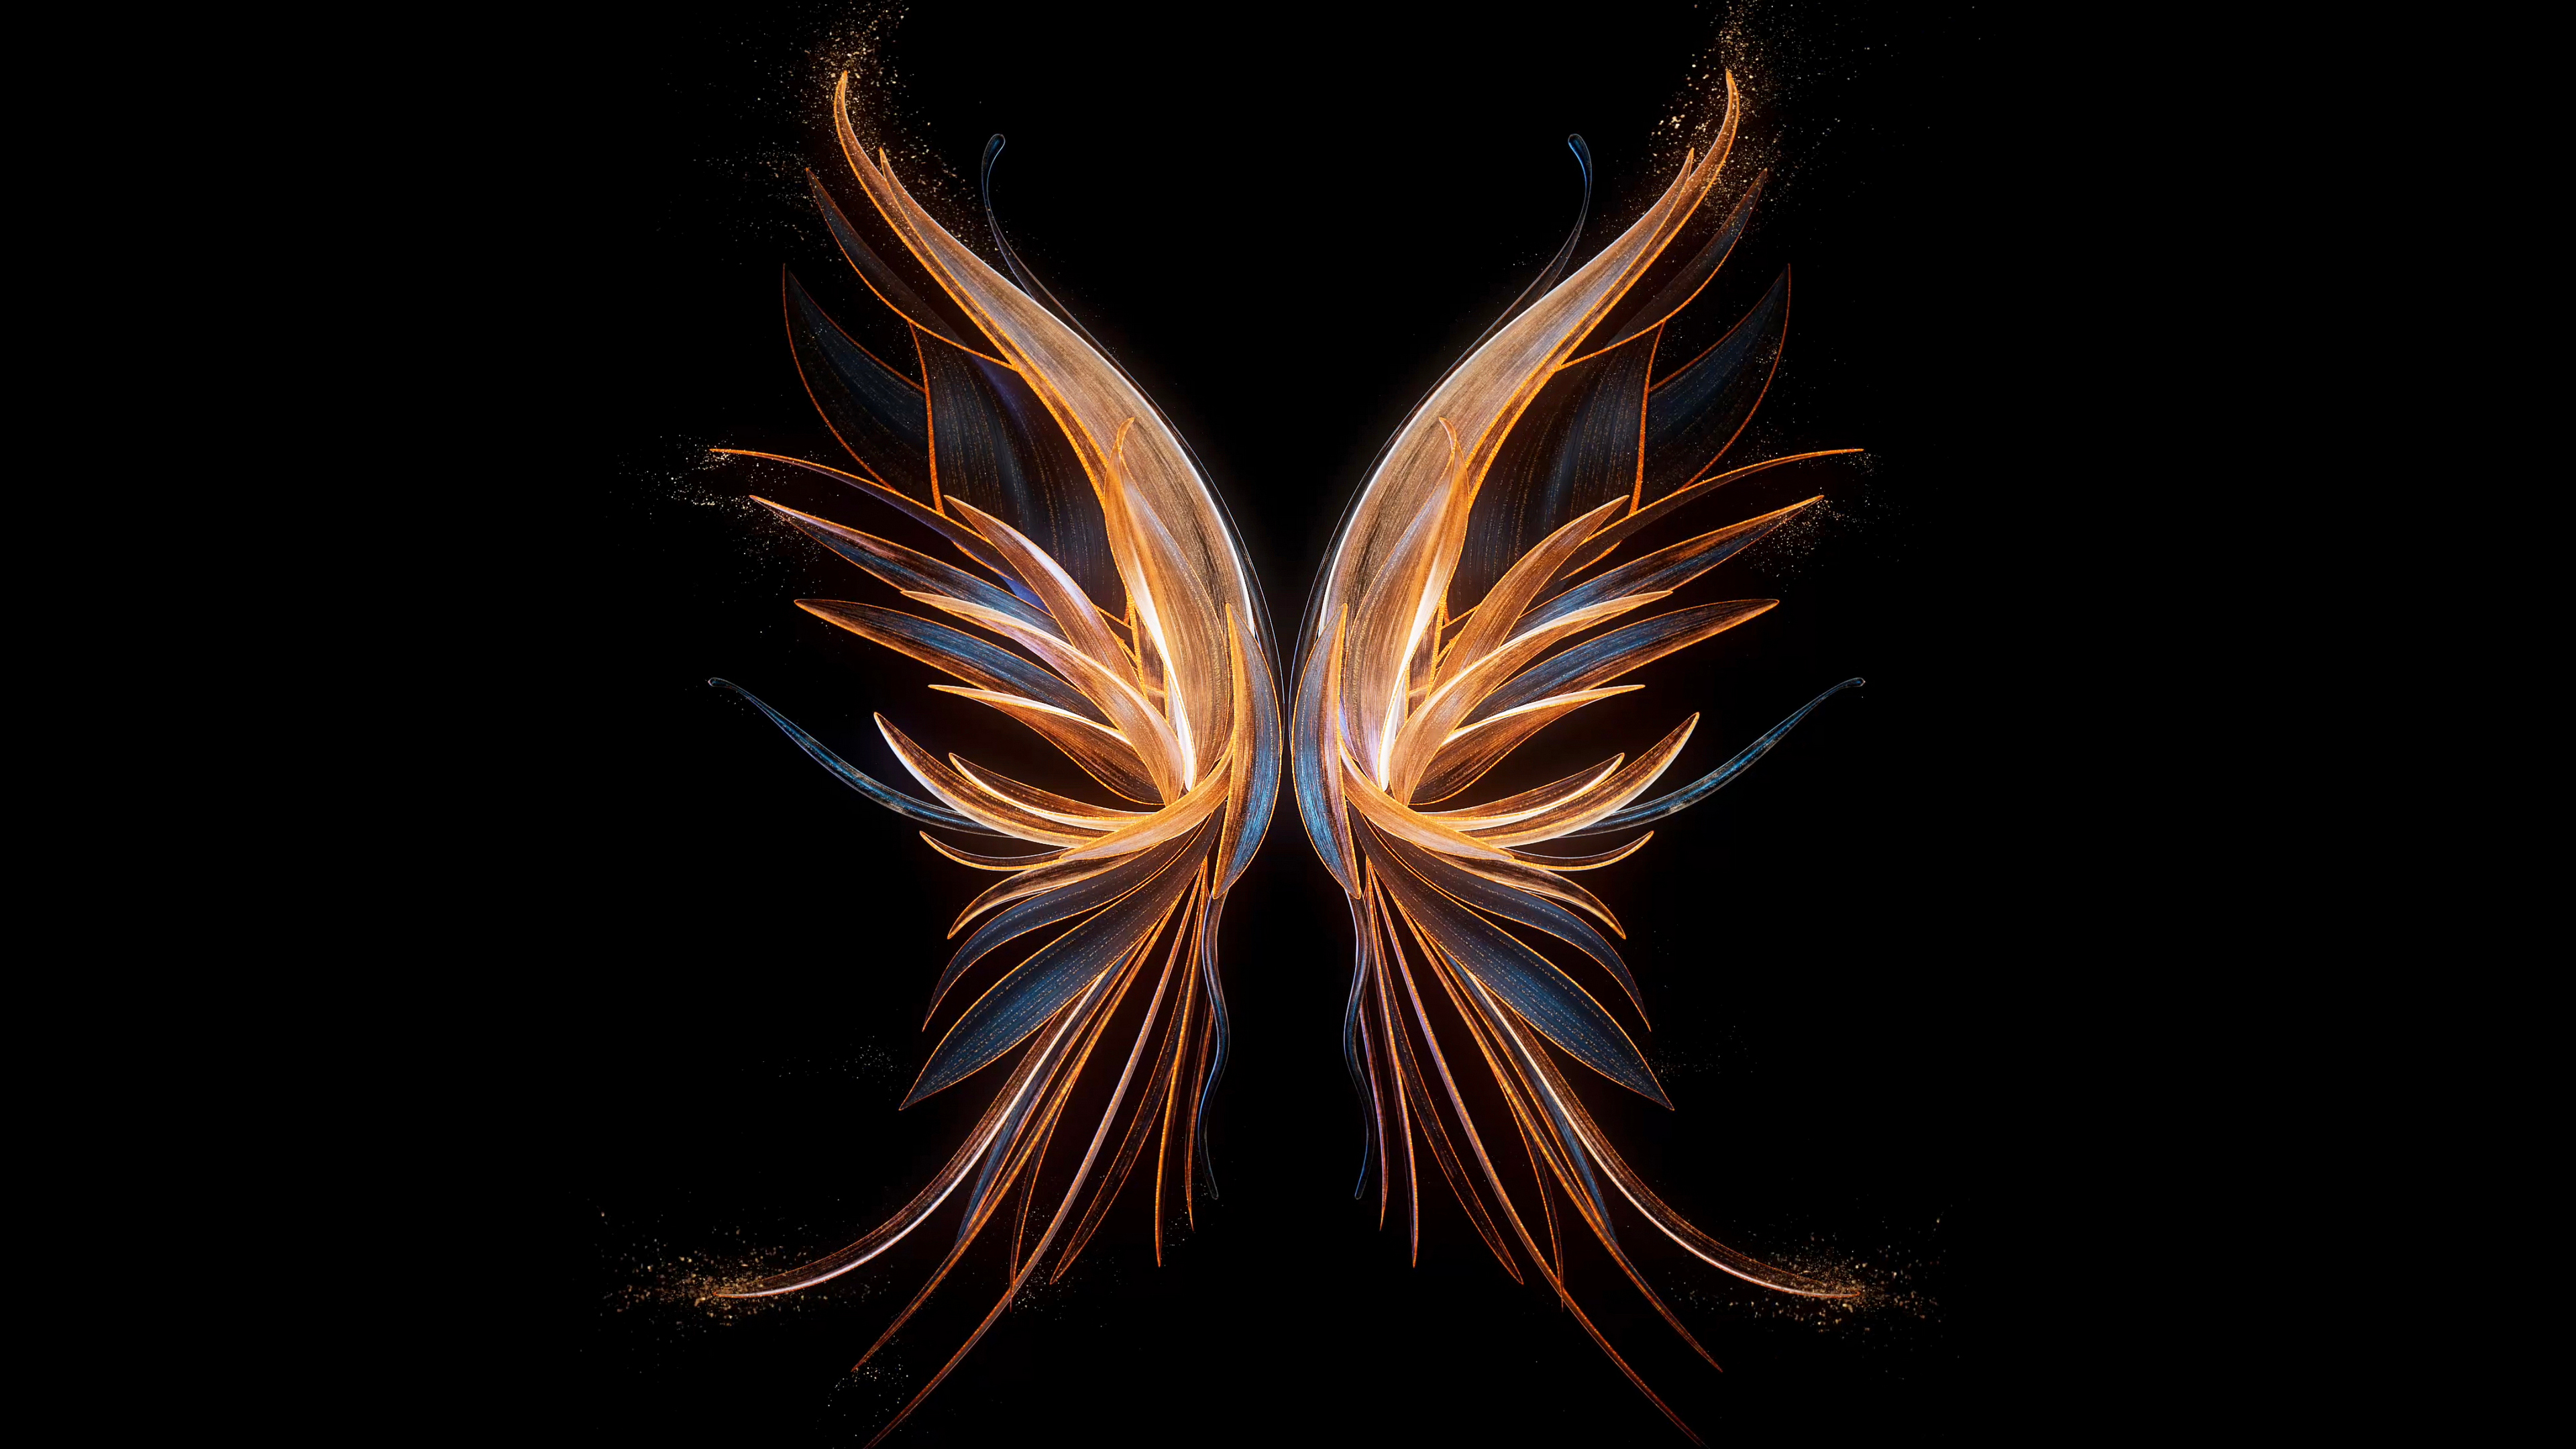 Dark background with wings of fire